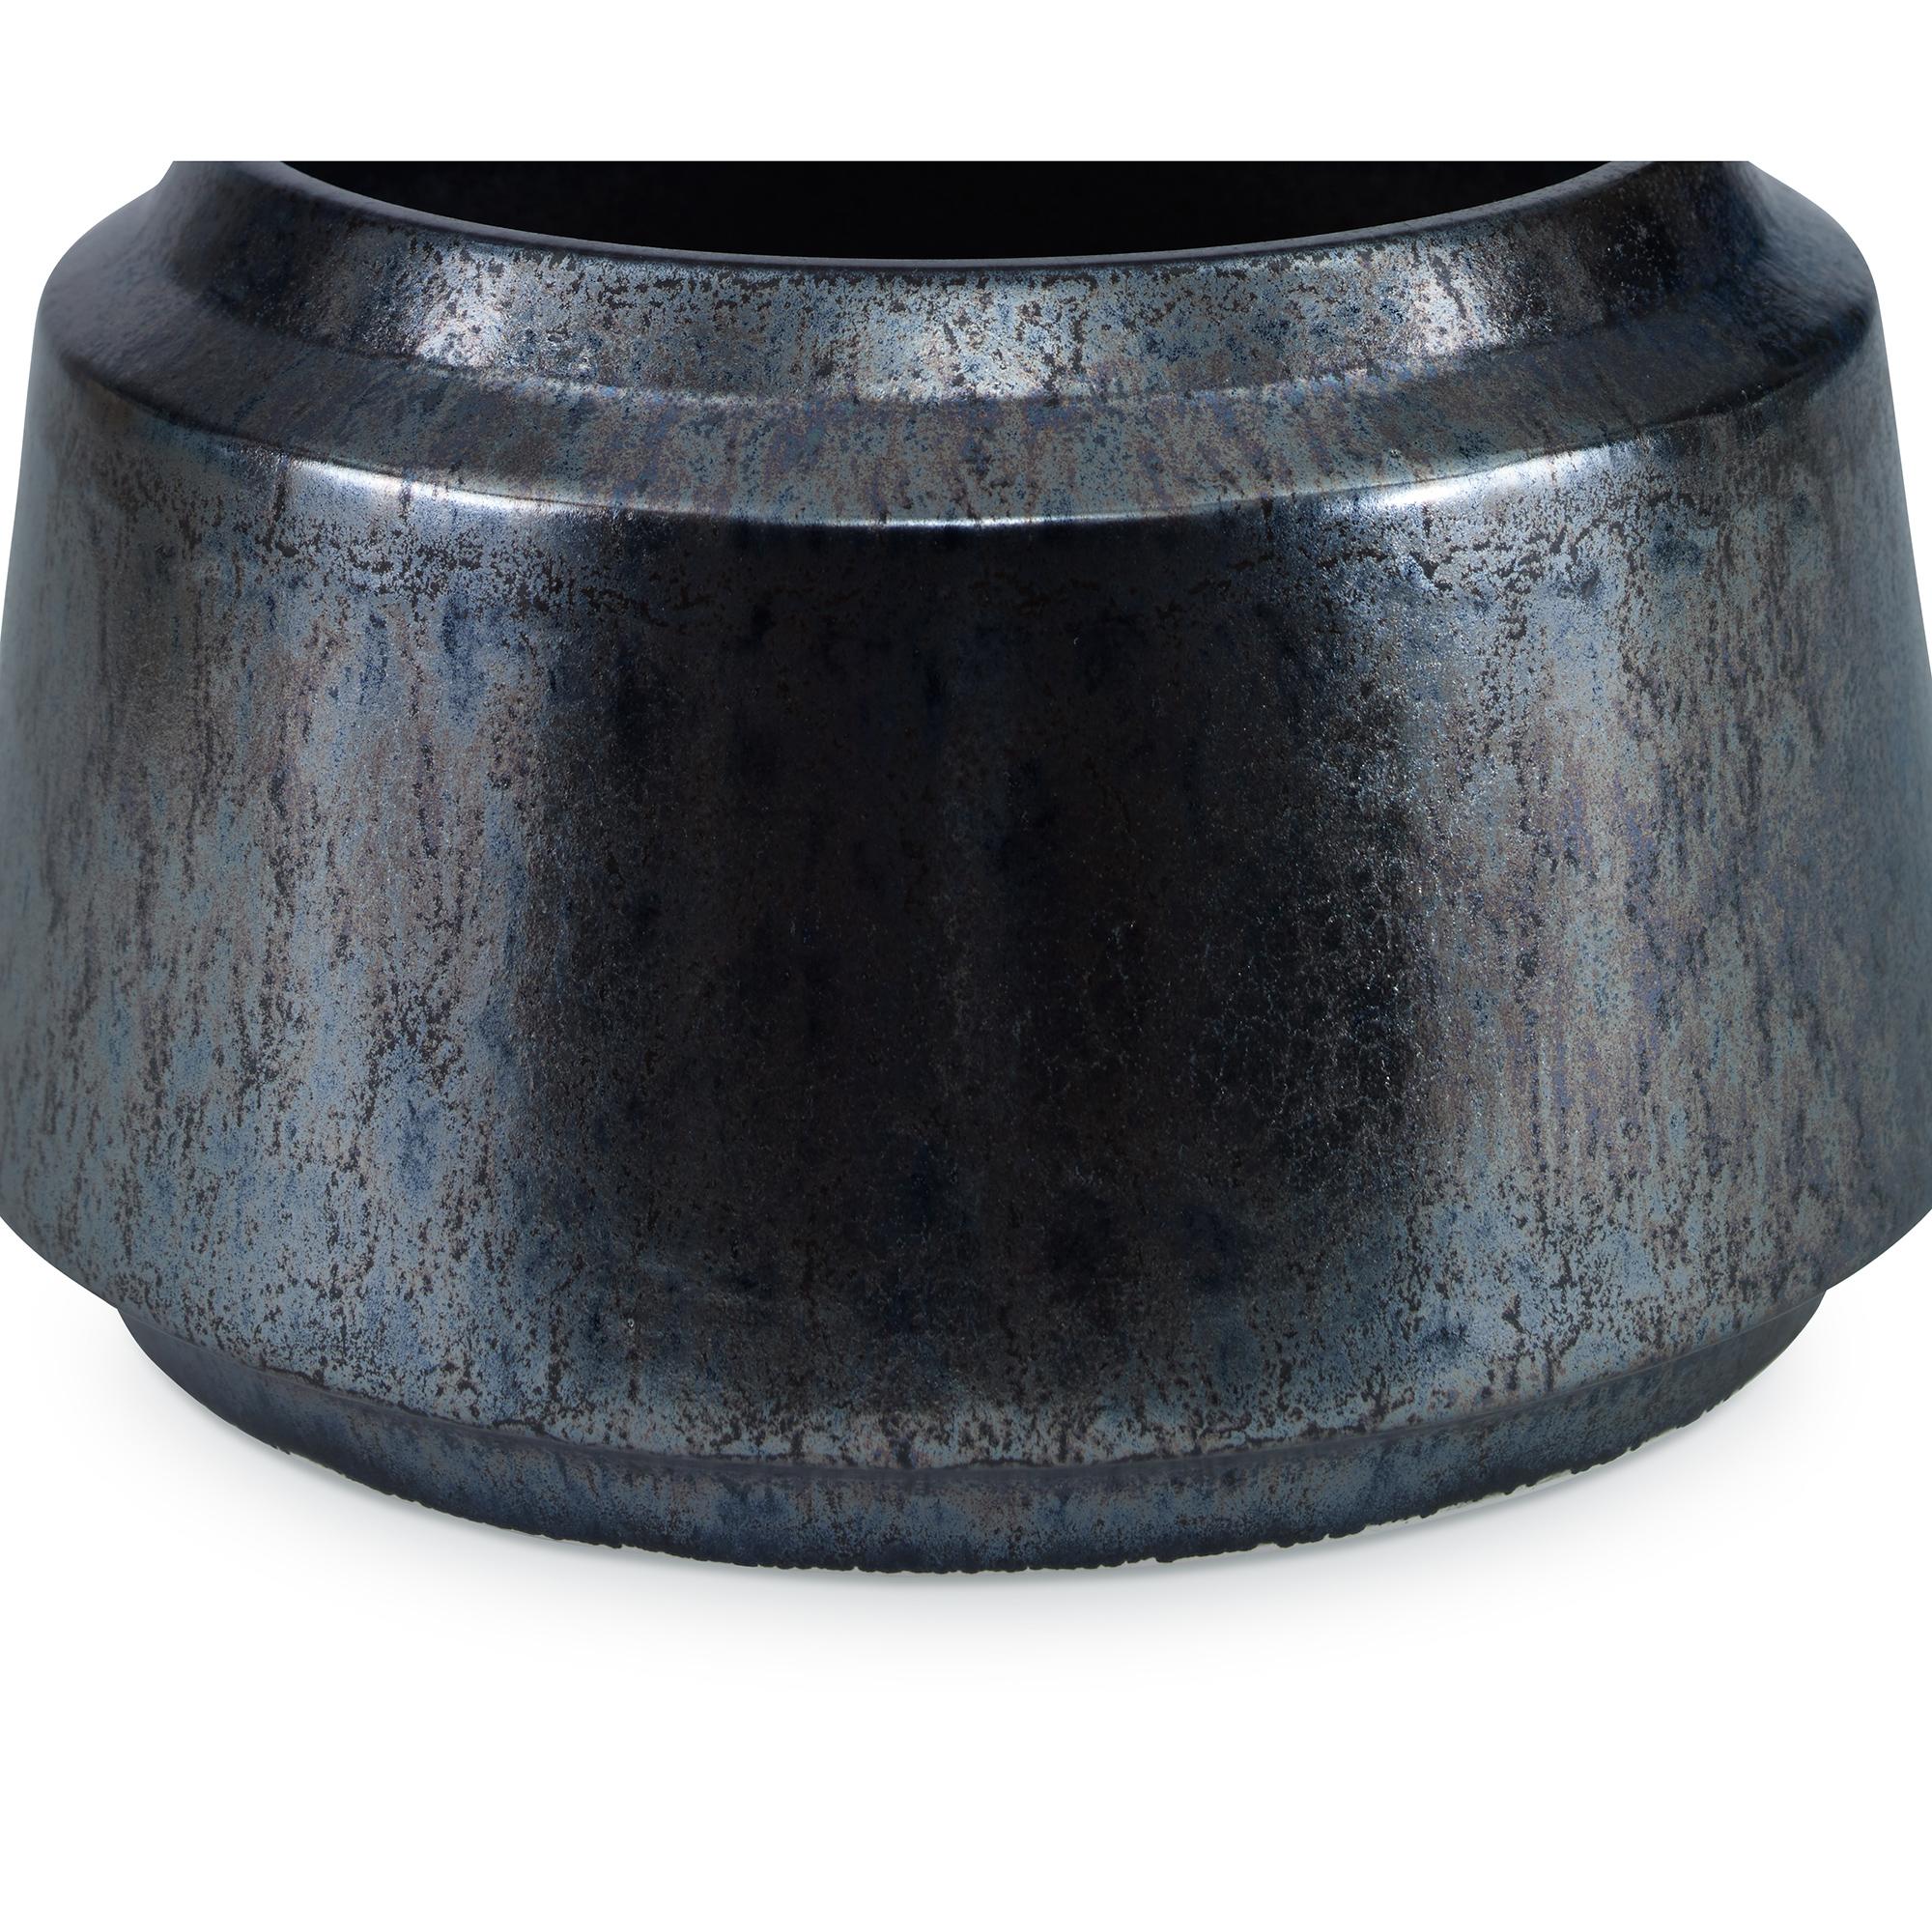 An earthenware bowl featuring a reactive stone glaze. Due to the nature of the glaze, each vase is to be considered unique.
 